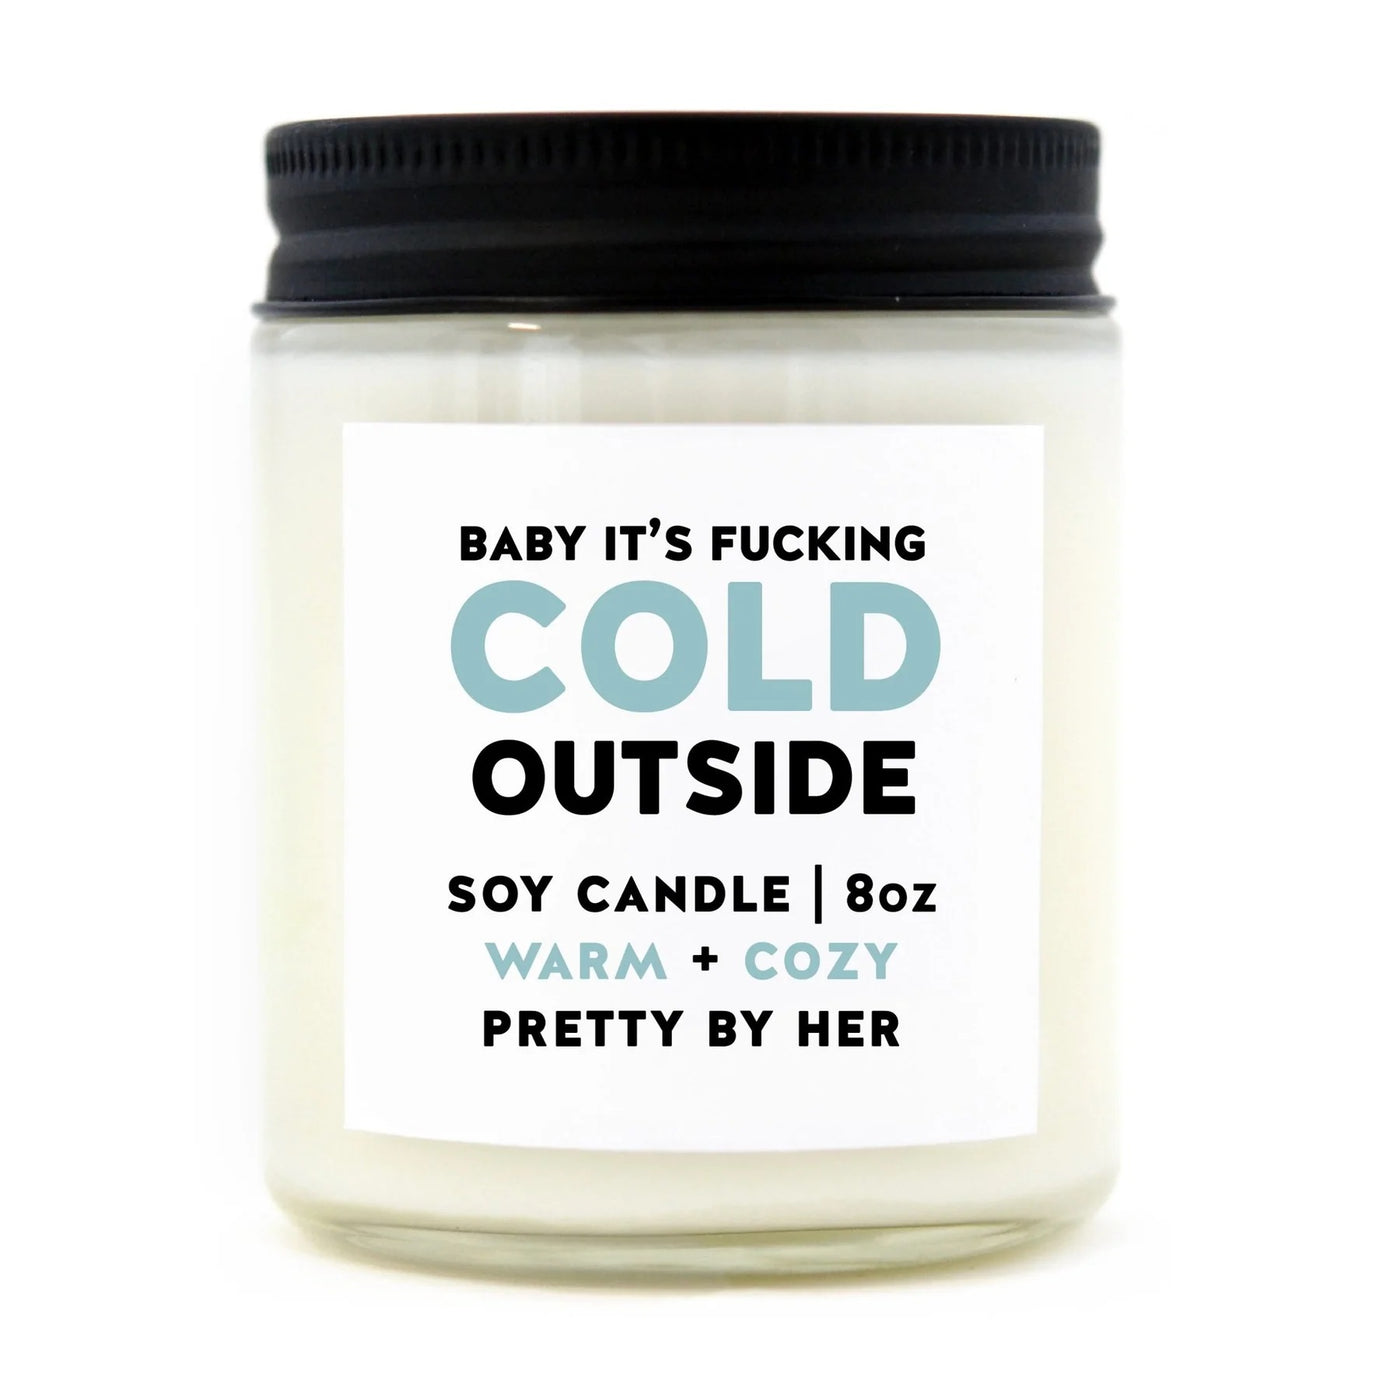 BABY IT'S FUCKING COLD OUTSIDE CANDLE